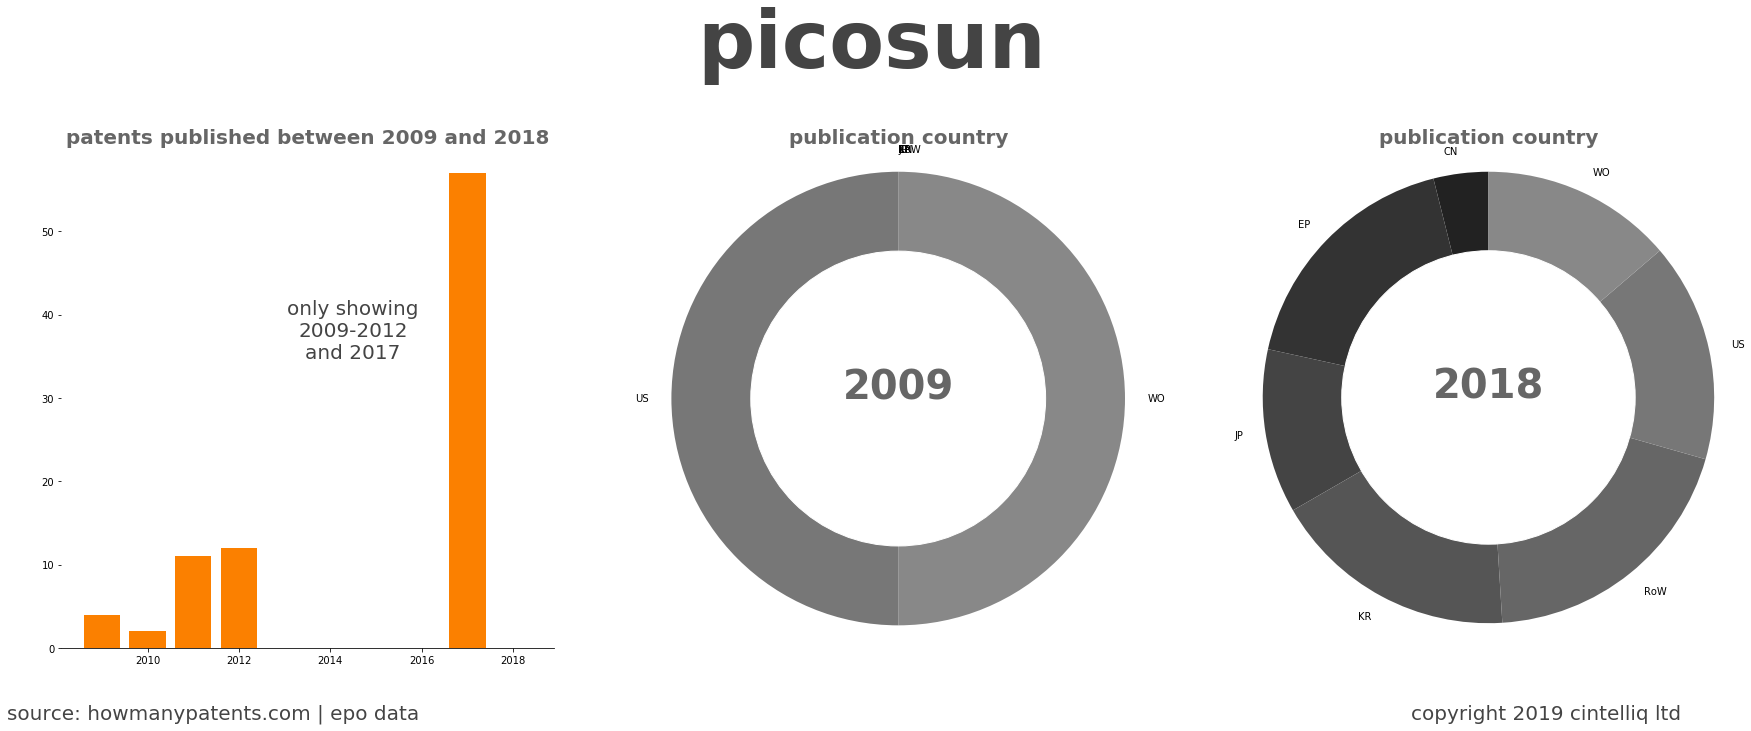 summary of patents for Picosun